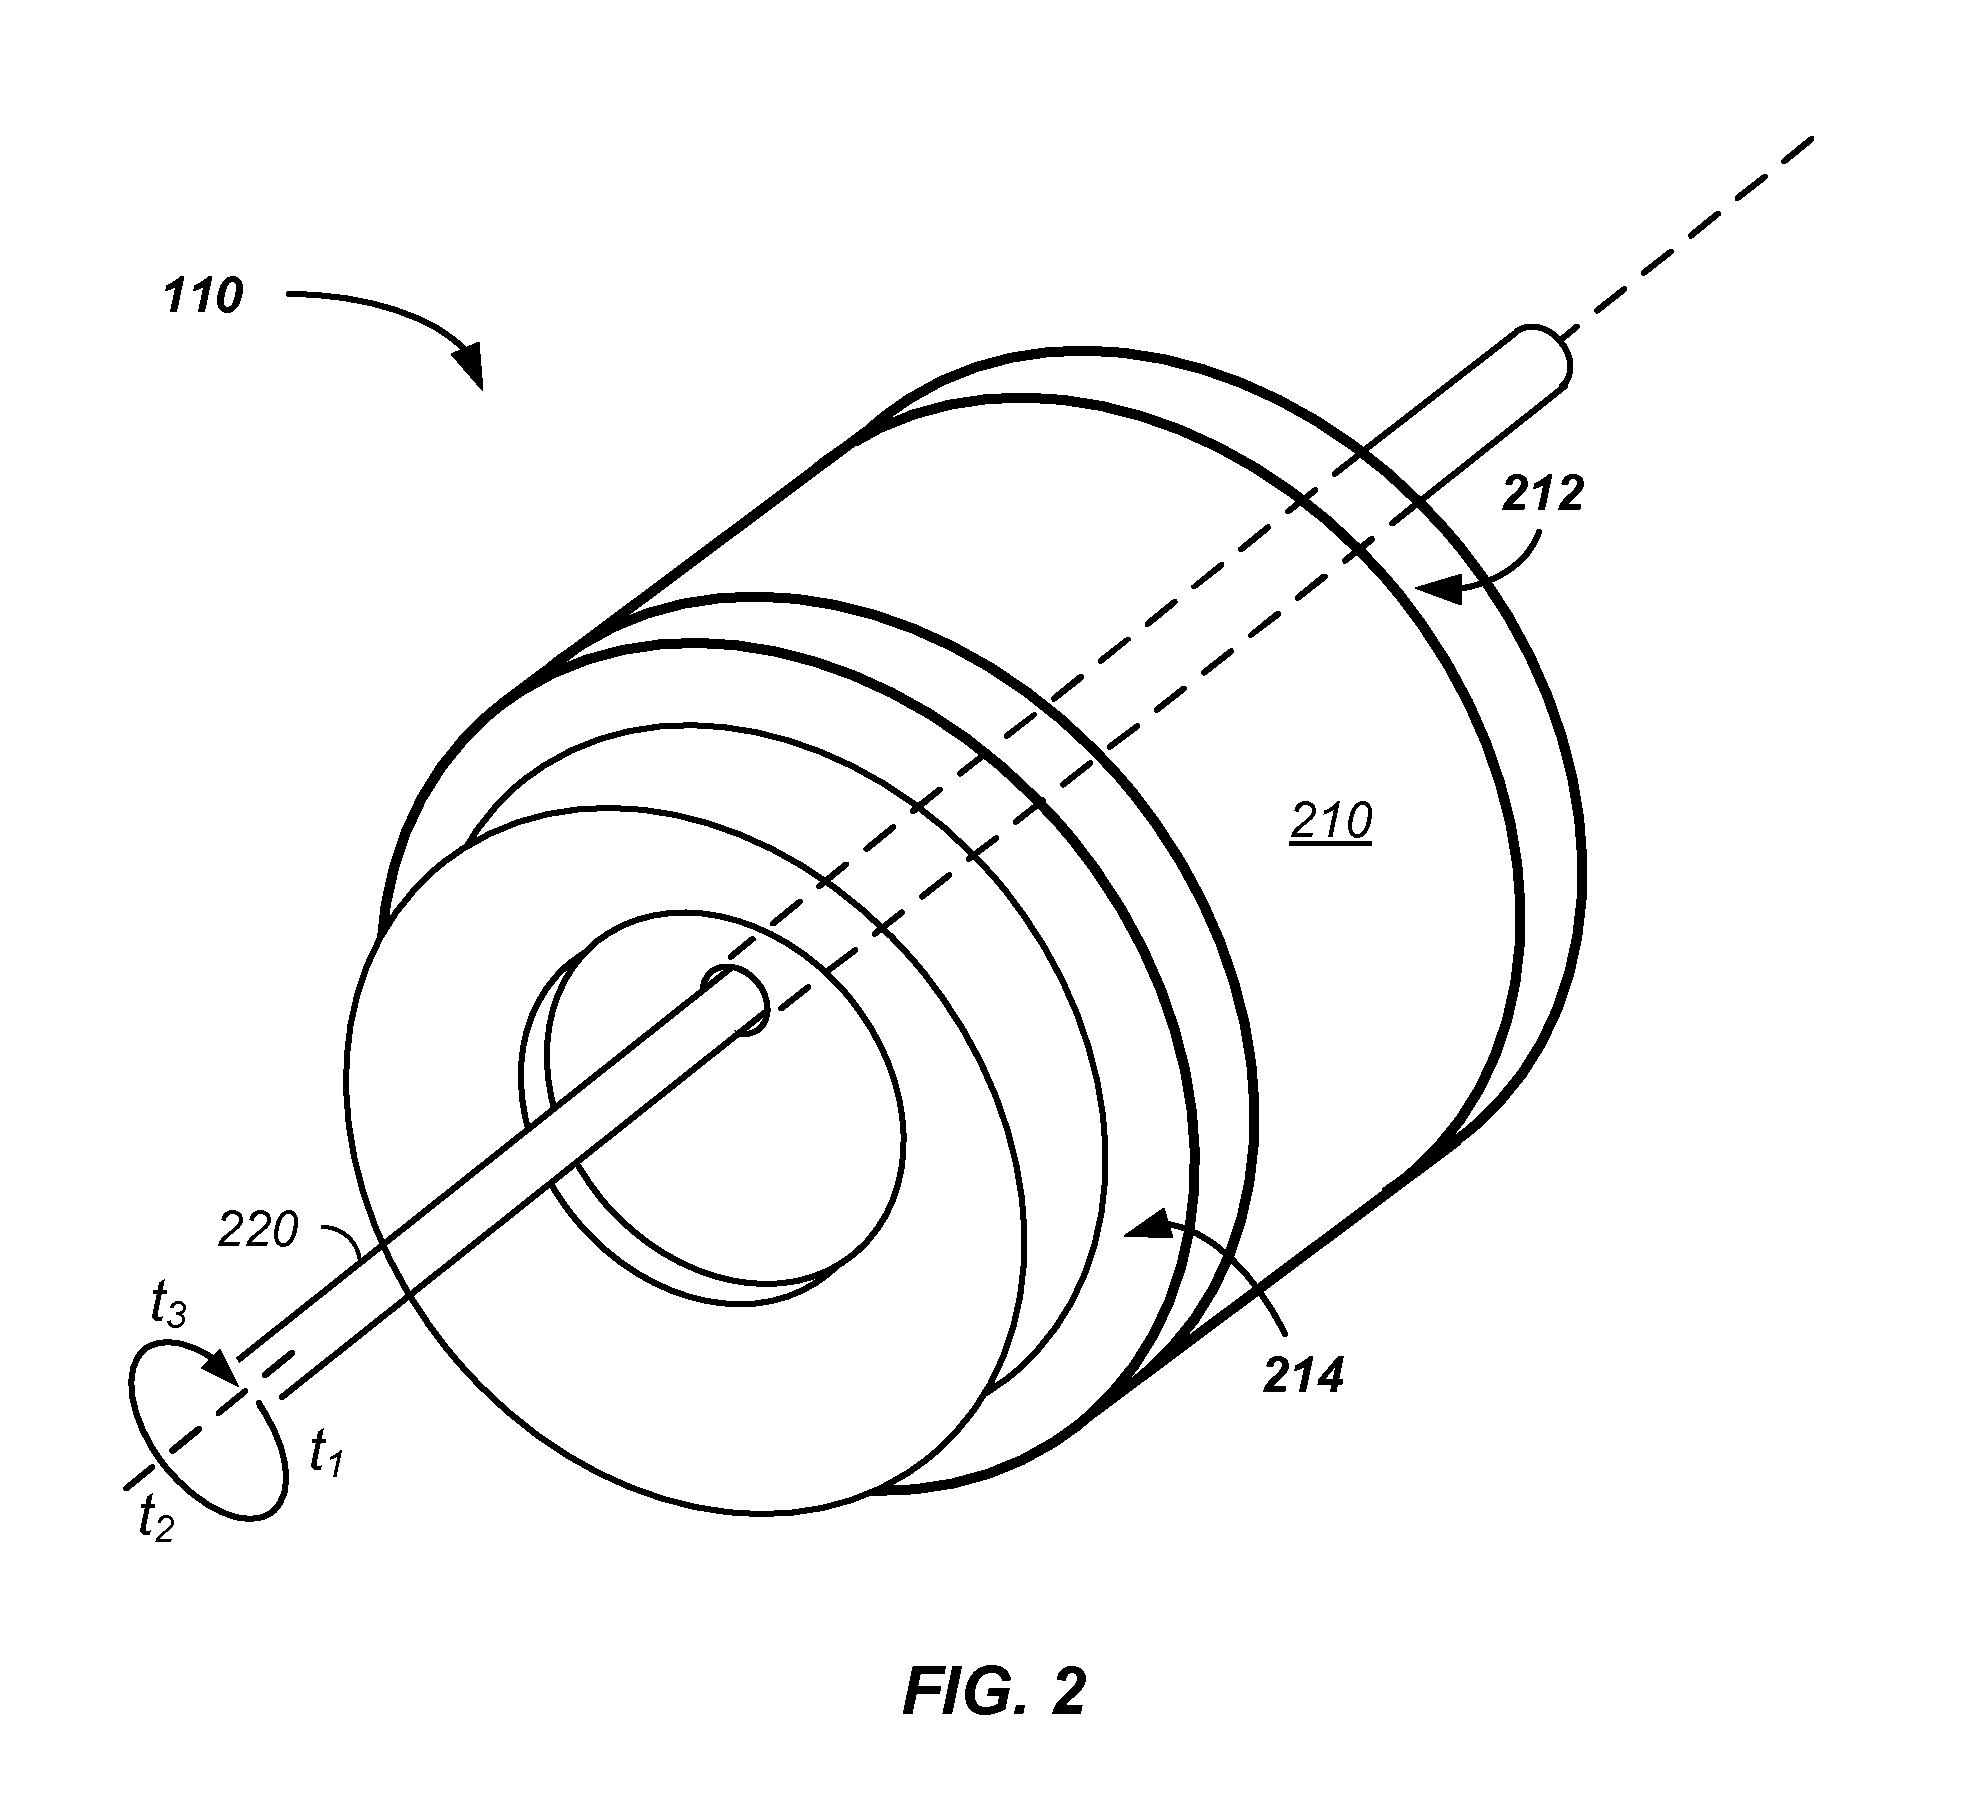 Rotary engine expansion chamber apparatus and method of operation therefor